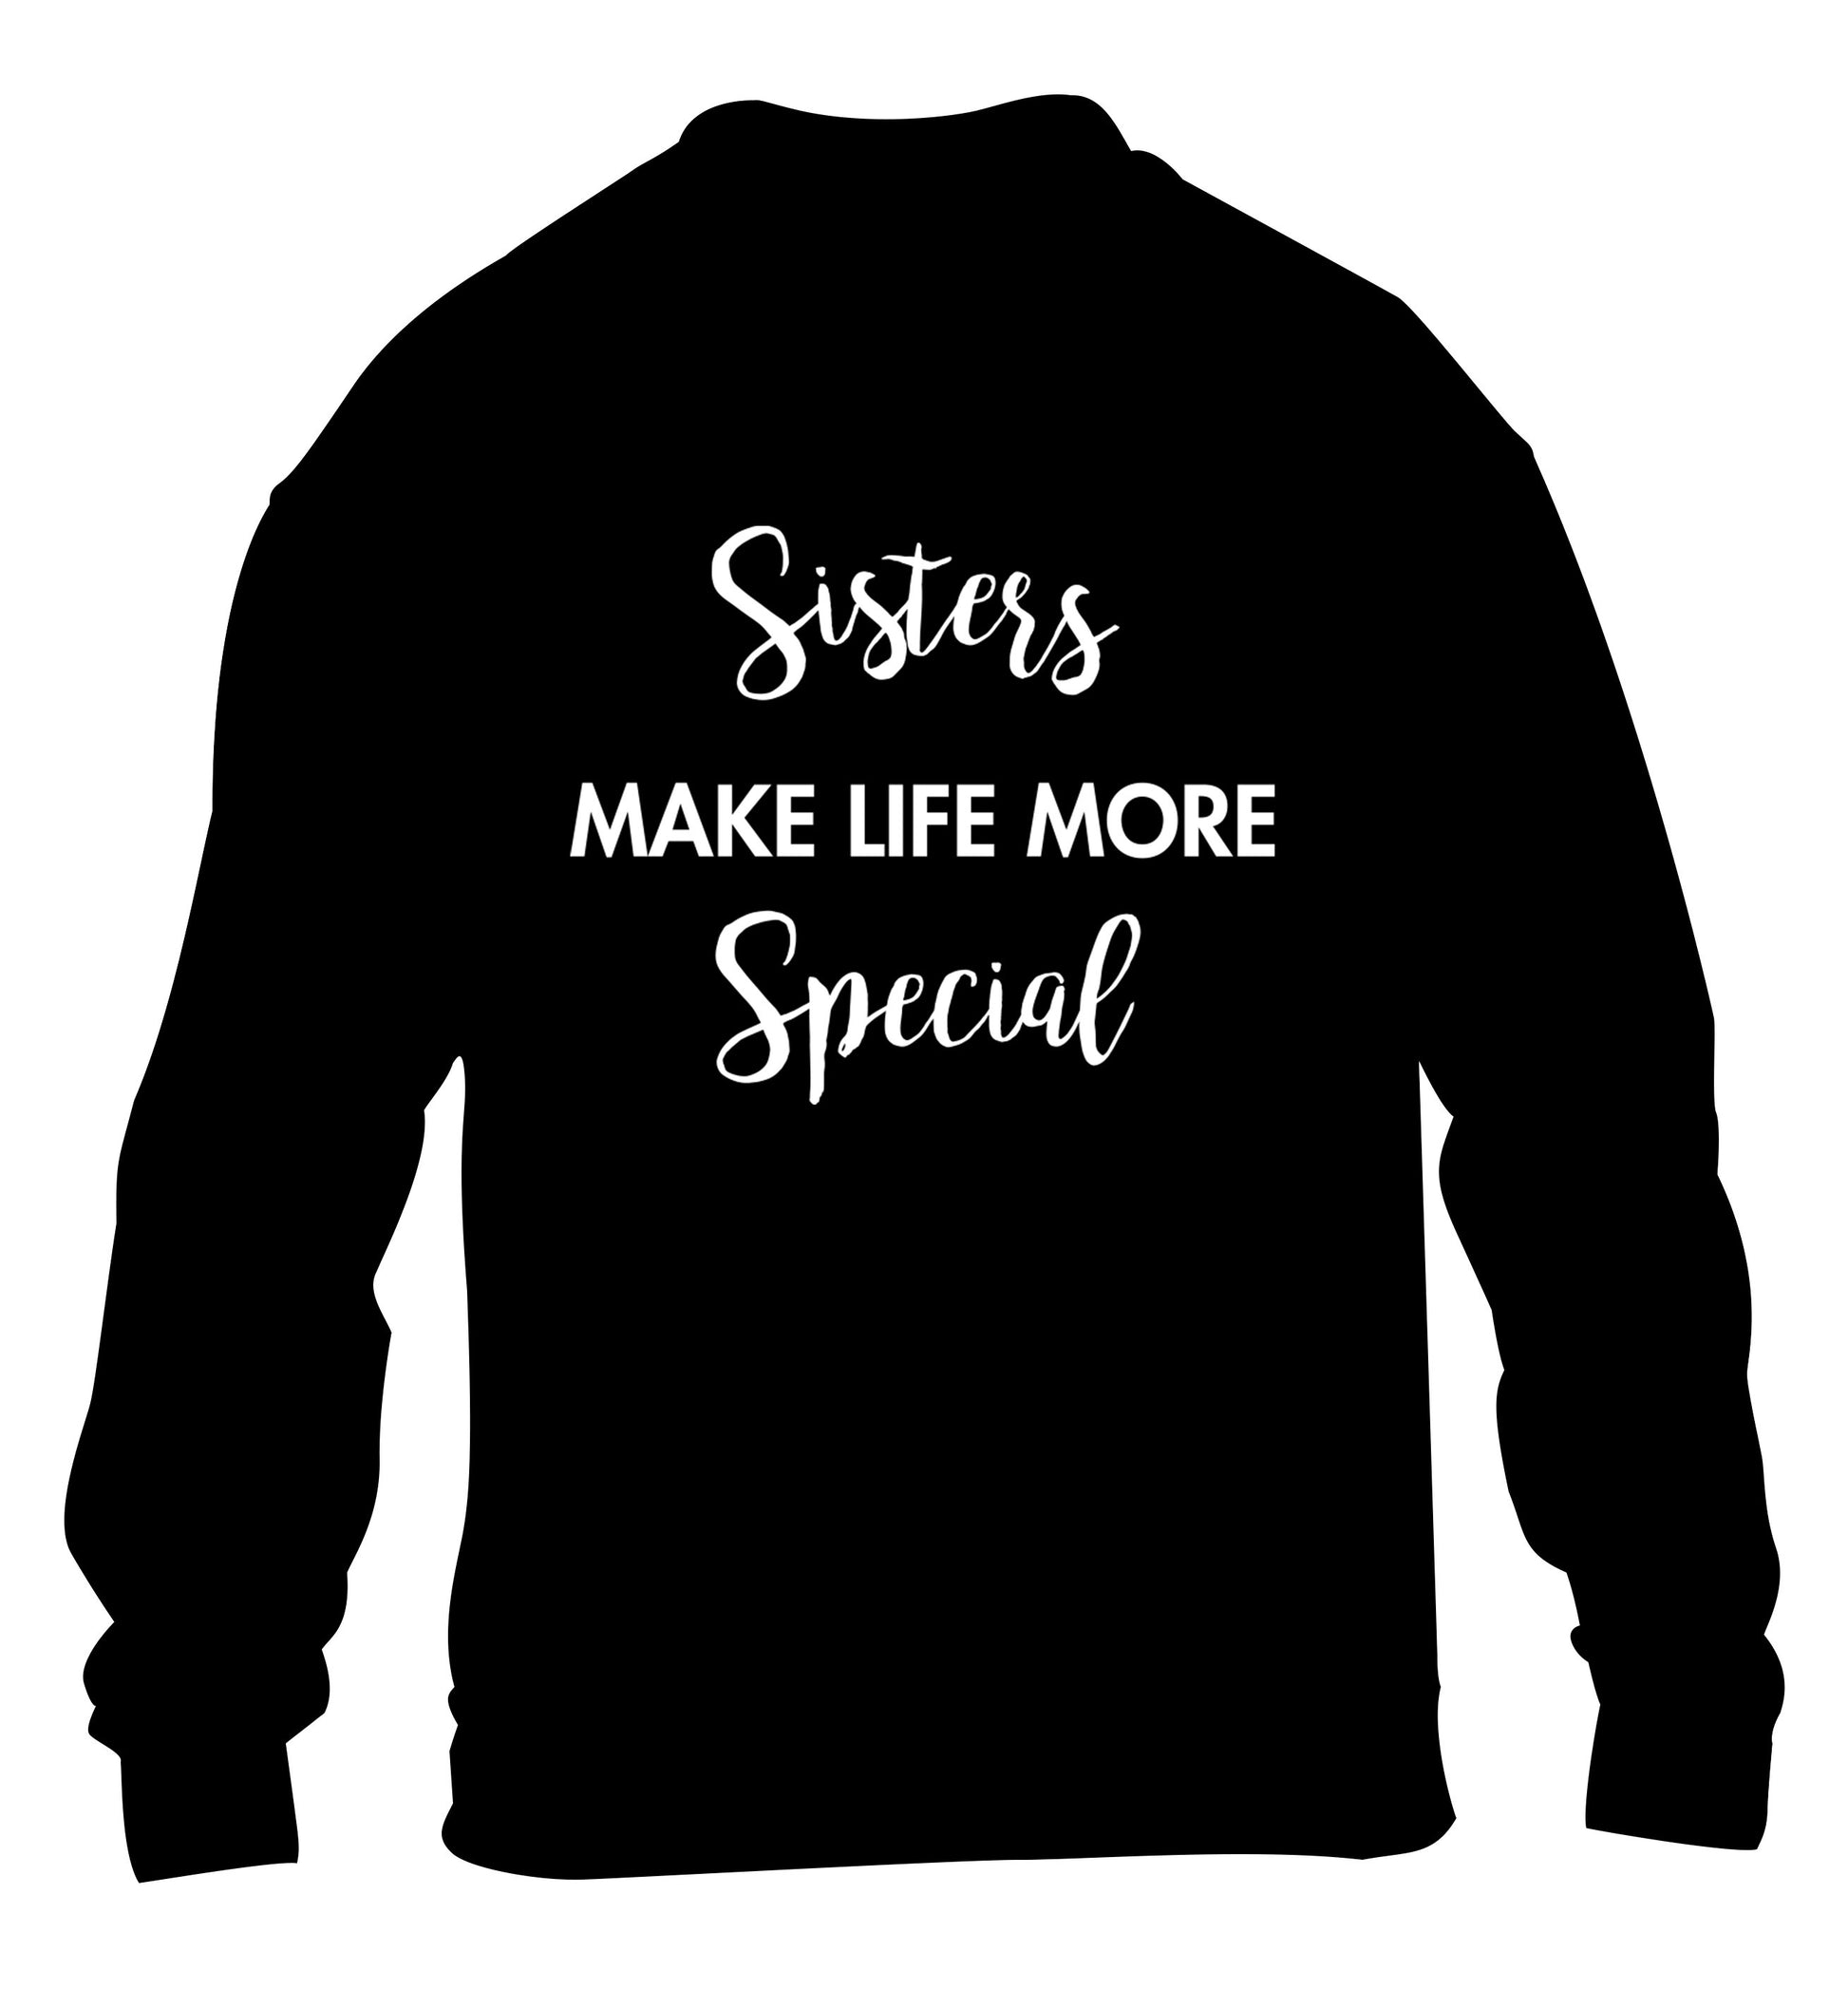 Sisters make life more special children's black sweater 12-14 Years